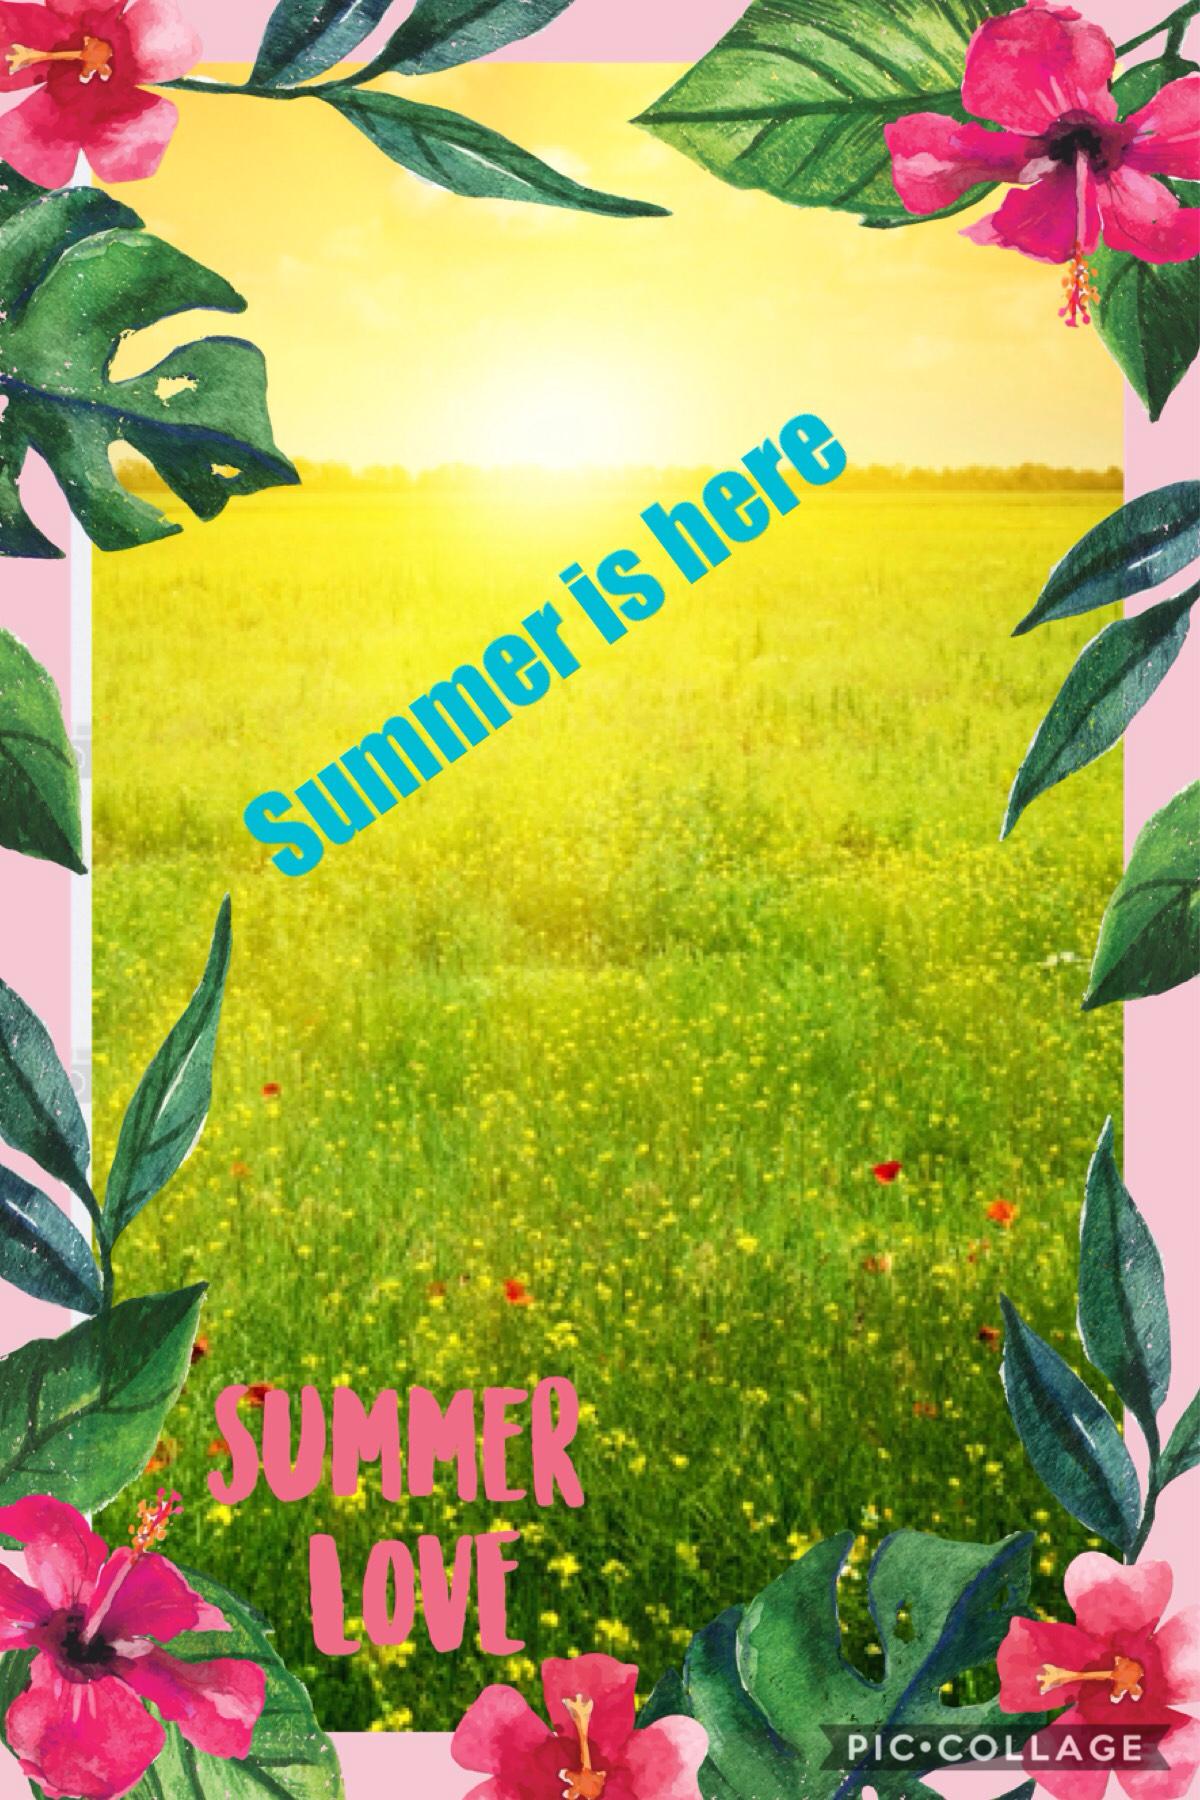 Summer is here and it's time to spend time with friends in the warm summer sun🌅🌅!!!
Happy Summer🌅🌄!!!